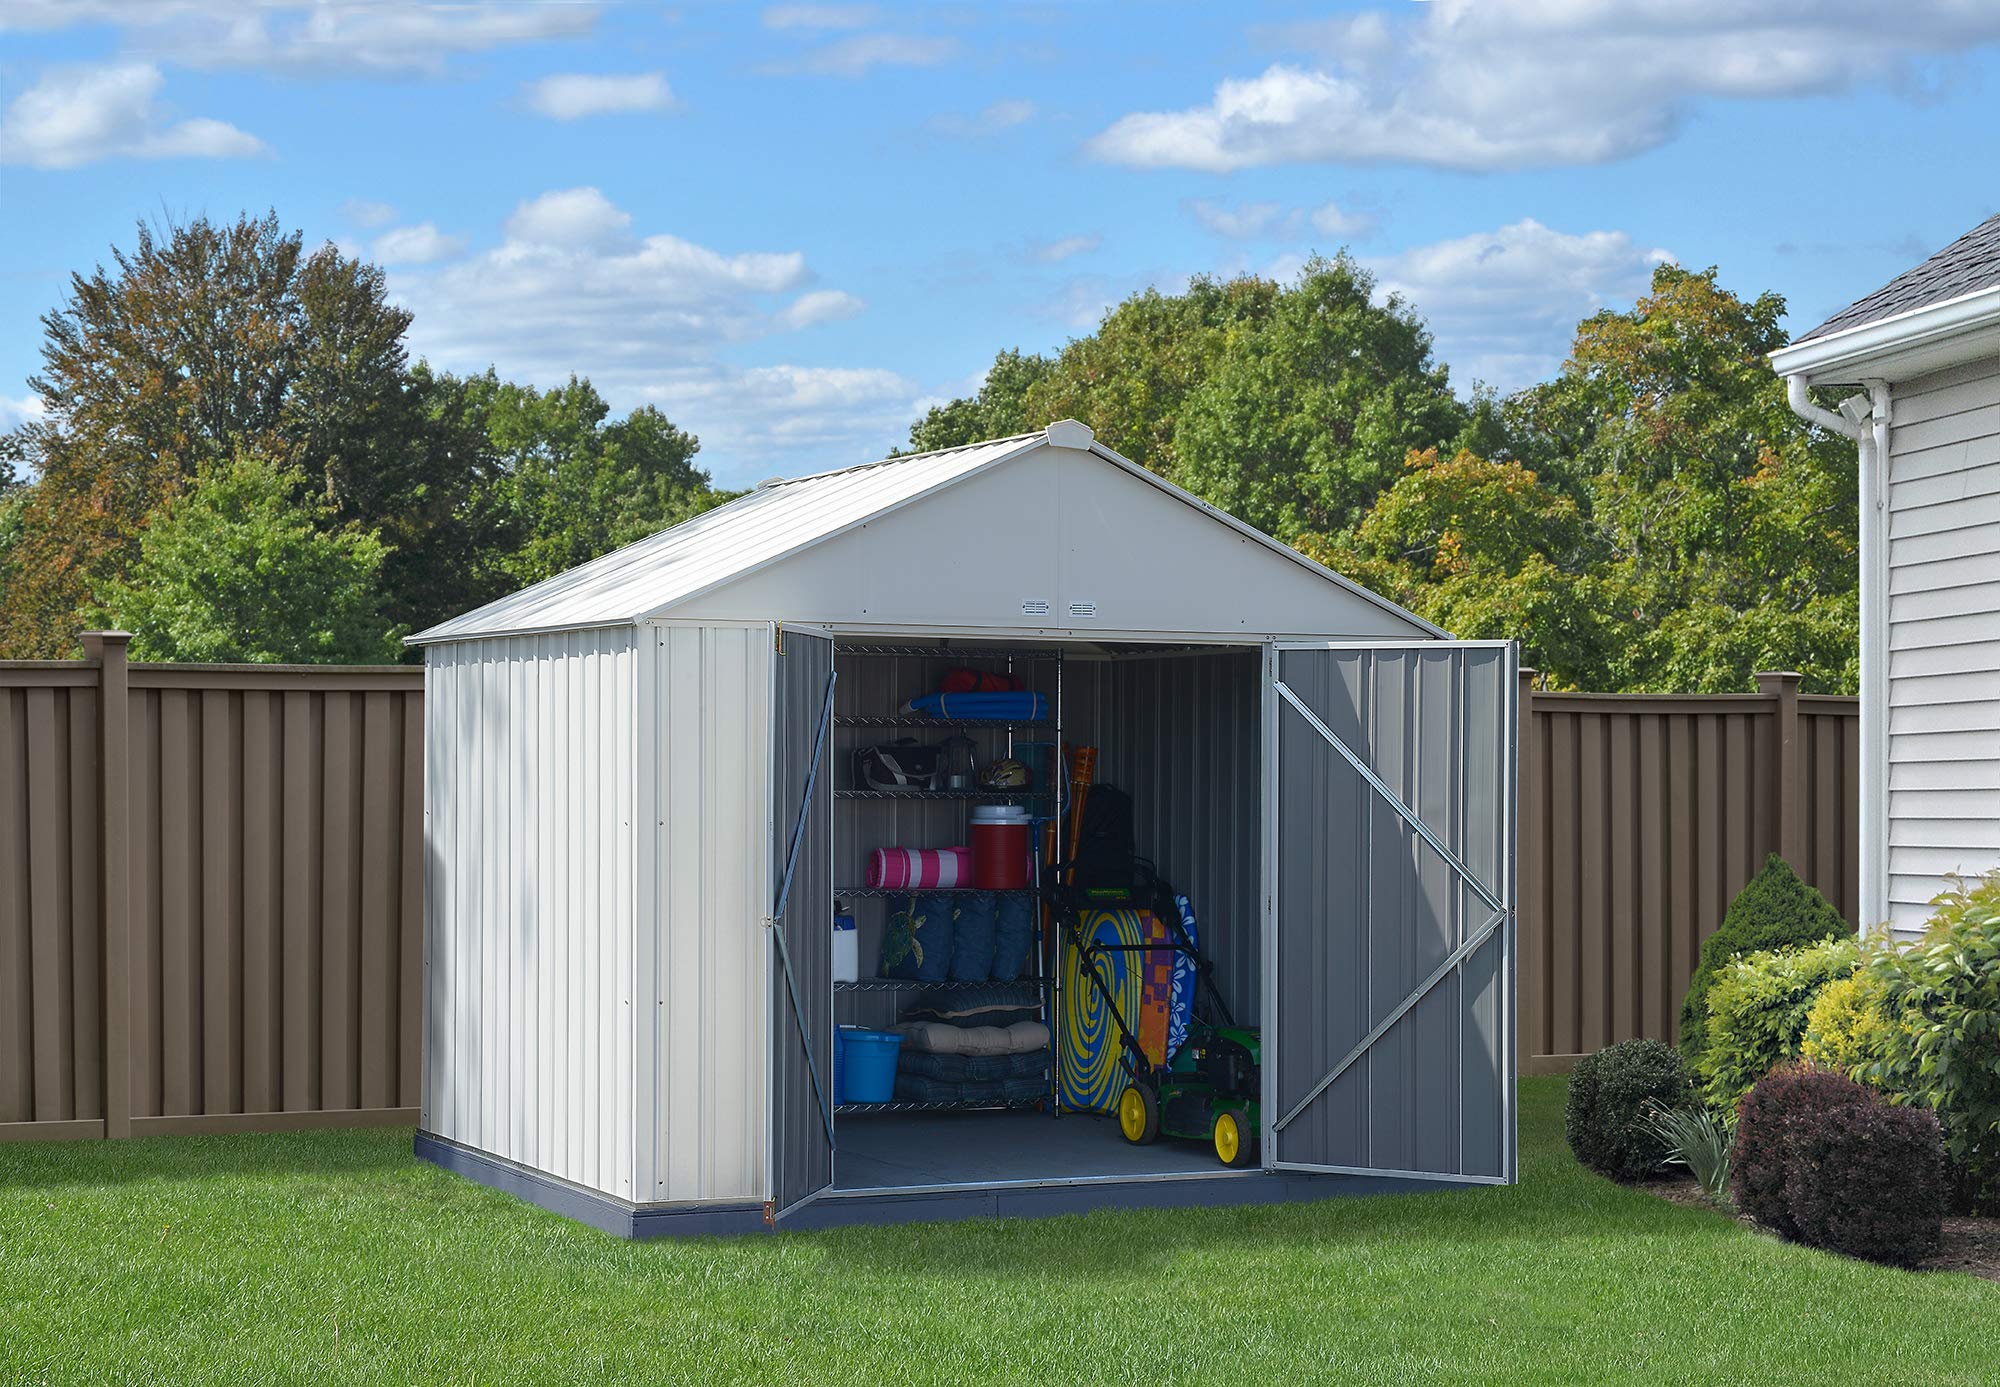 arrow ezee shed extra high gable steel storage shed, cream